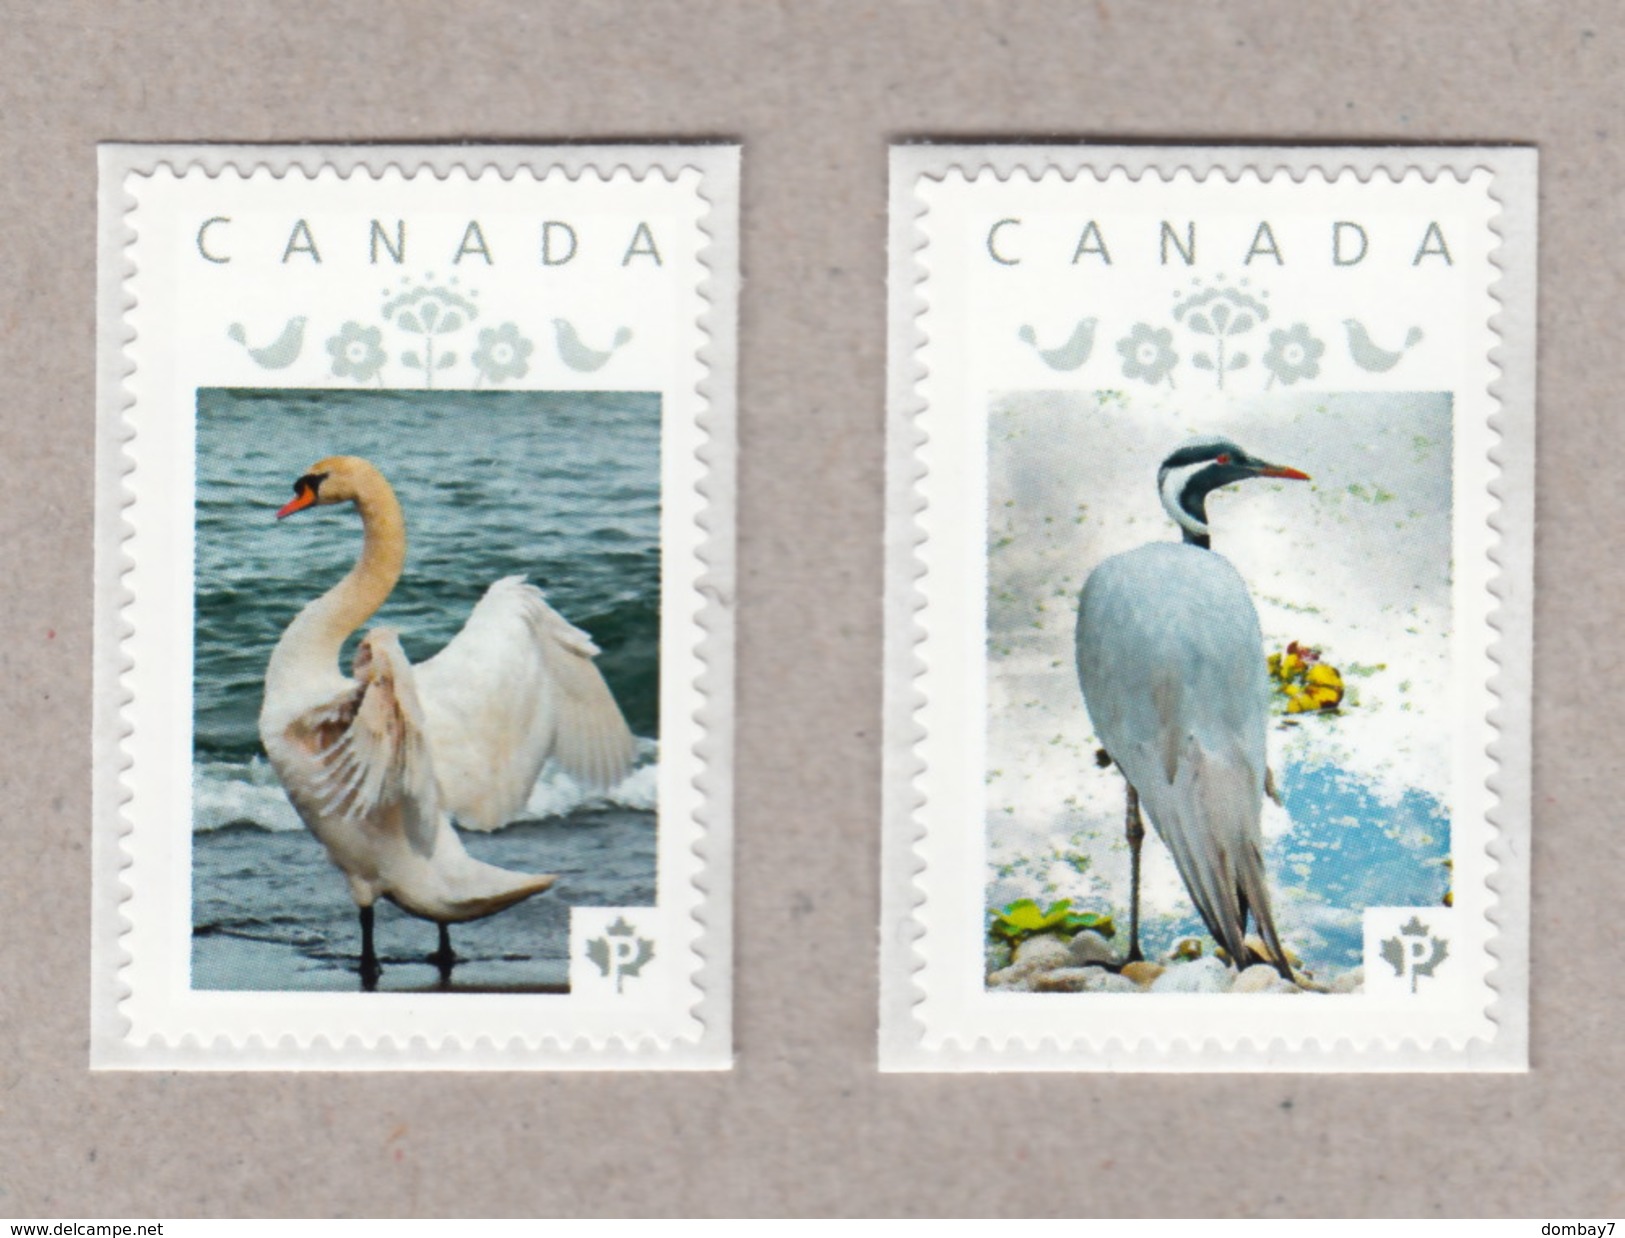 SWAN, CRANE Pair Of Unique Personalized Postage Stamps MNH Canada 2017 [p17-01wb - Swans